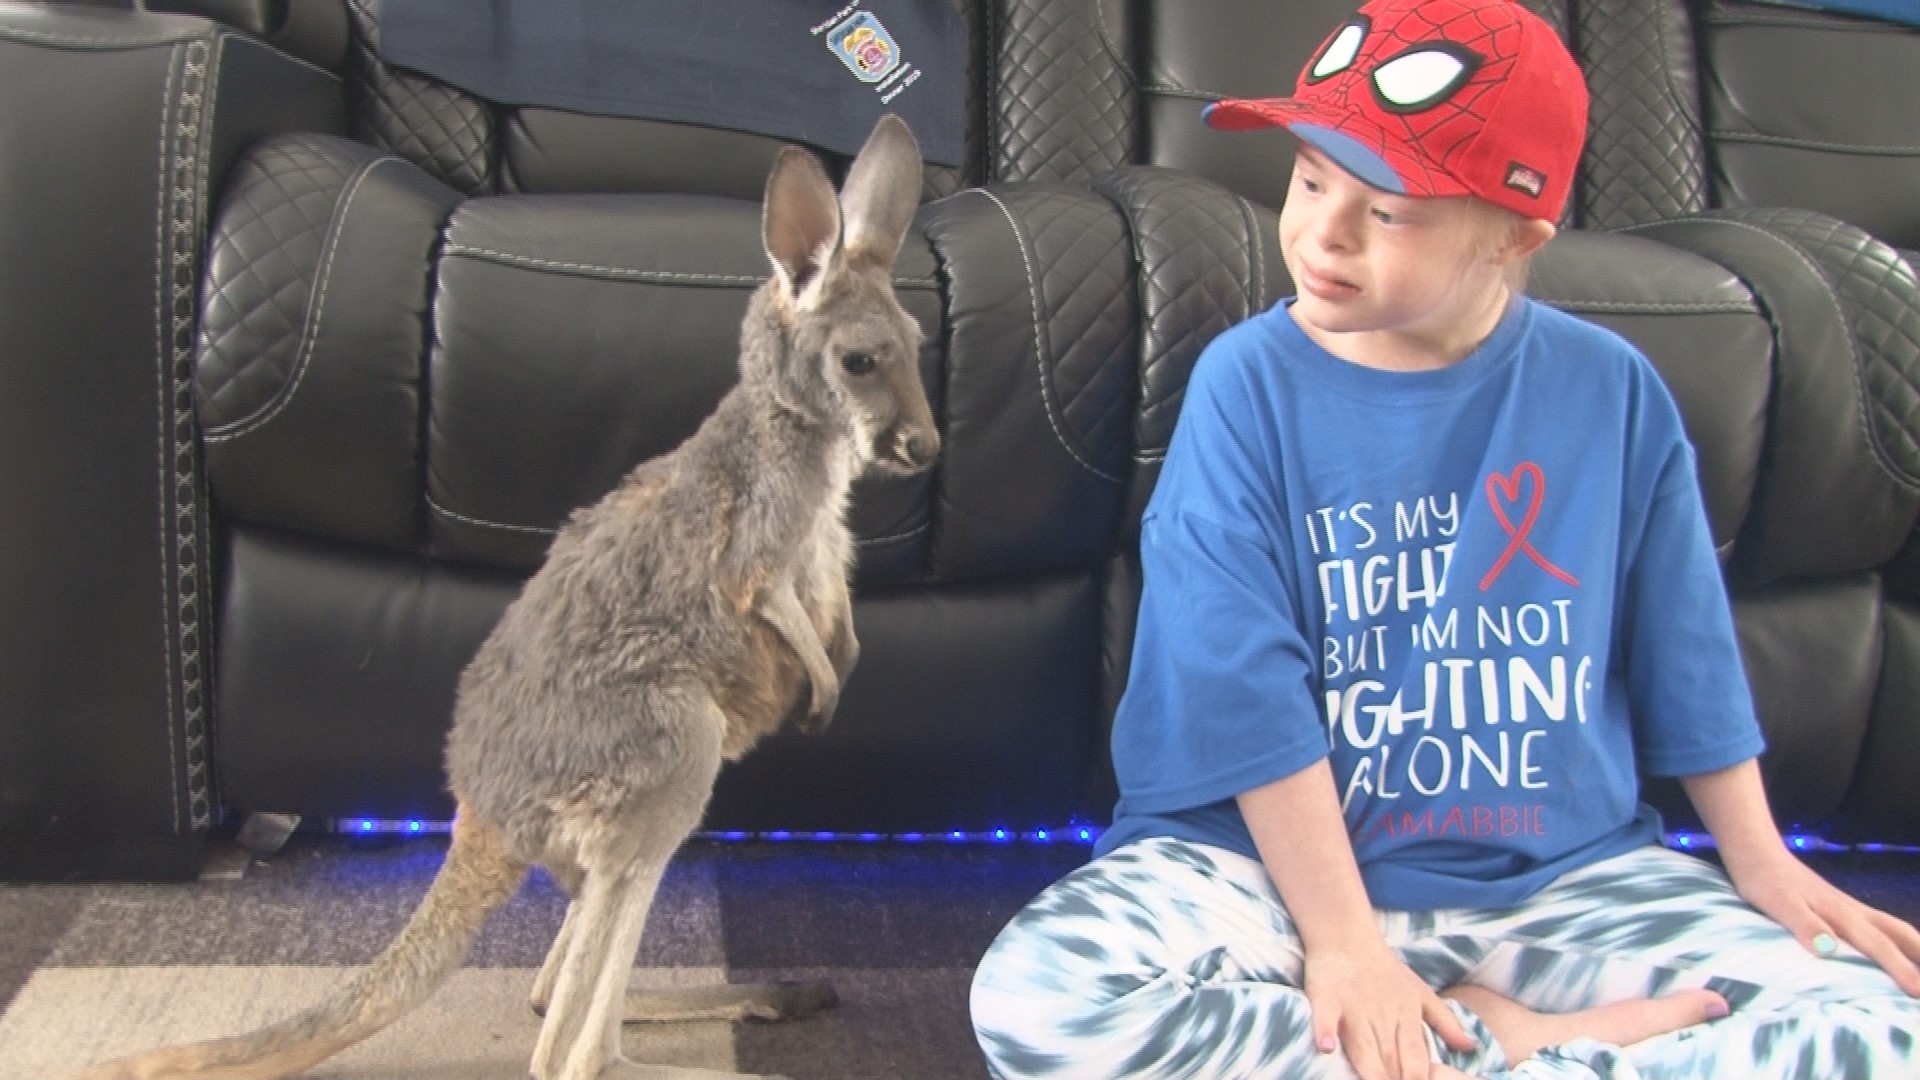 9-year-old Abbie McNett was able to forget about her pain while she played with a baby kangaroo thanks to Sweet Buffalo and Niagara Down Under.